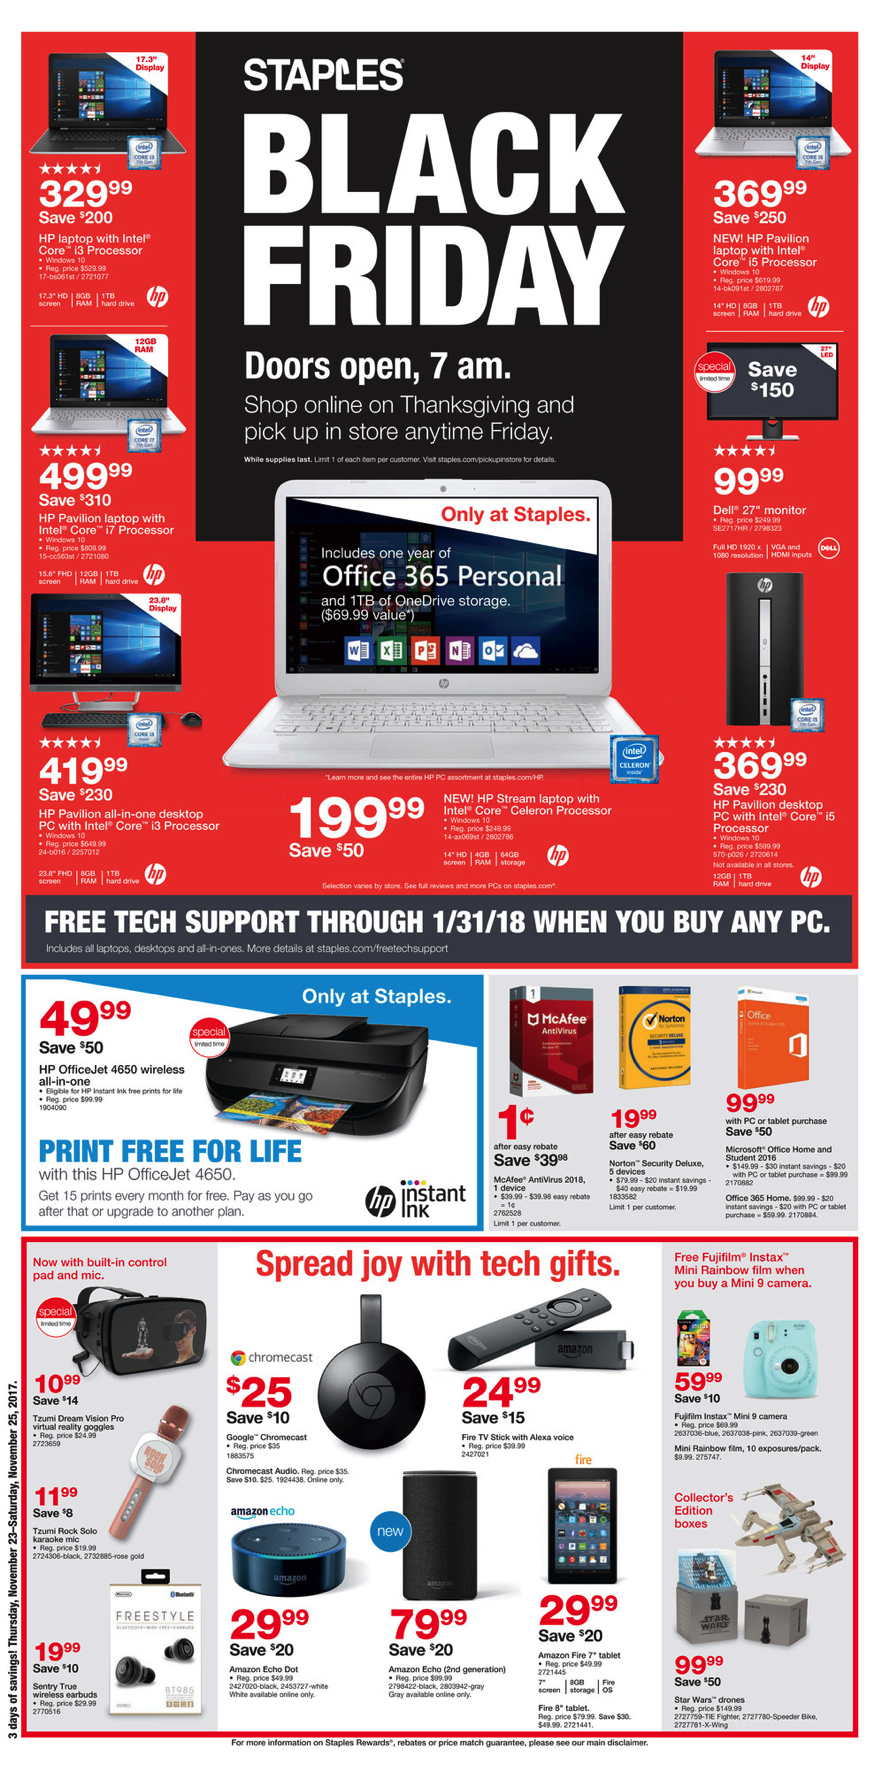 Staples Black Friday 2017 ad leak: Tons of laptop and PC deals – BGR